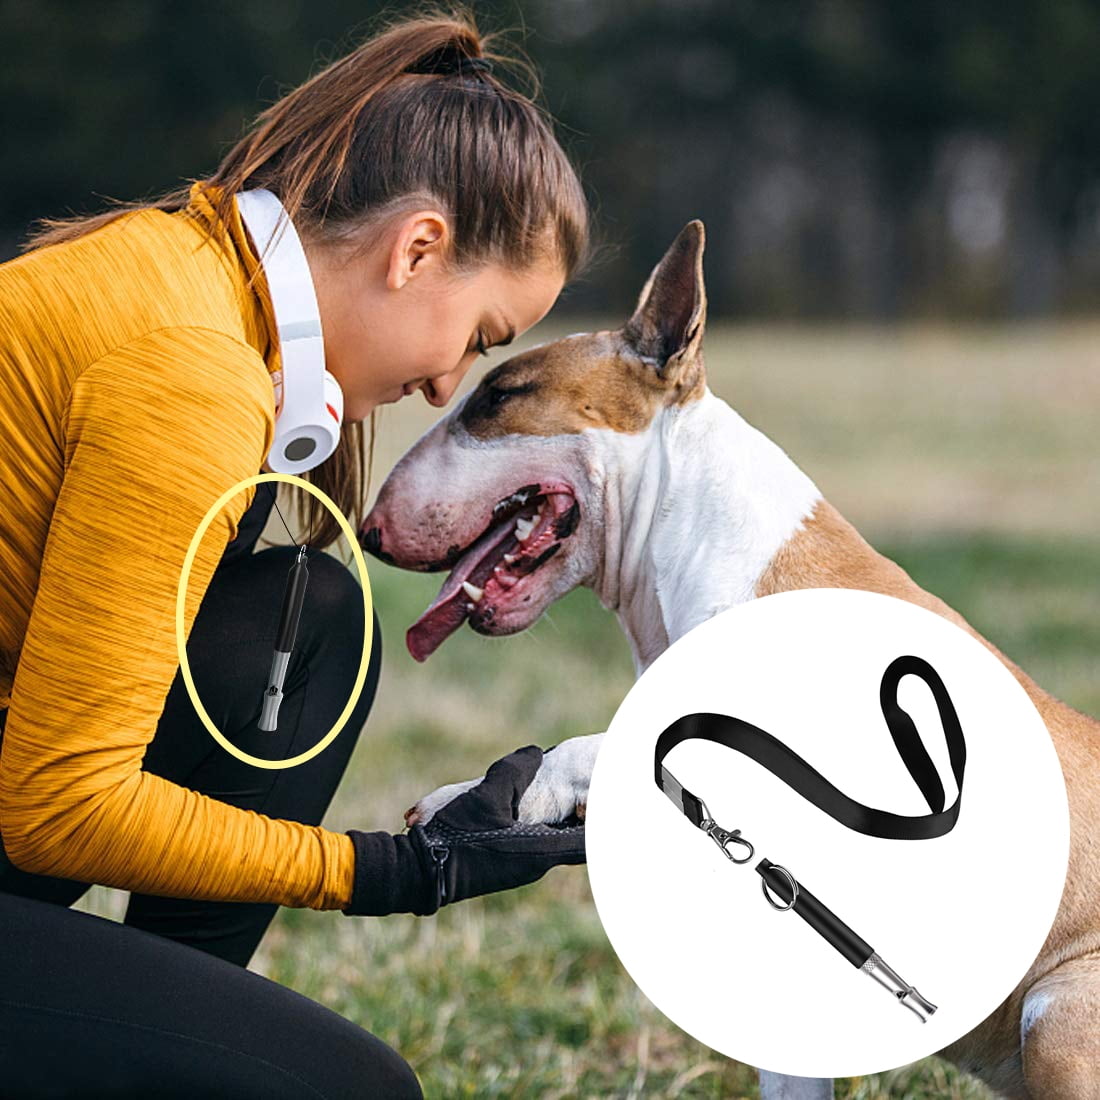 Black XQFI Dog Whistle Professional Dog Training Whistle to Stop Barking,Professional Ultrasonic Adjustable High Pitch Ultra-Sonic Sound Tool with Free Premium Quality Lanyard Strap